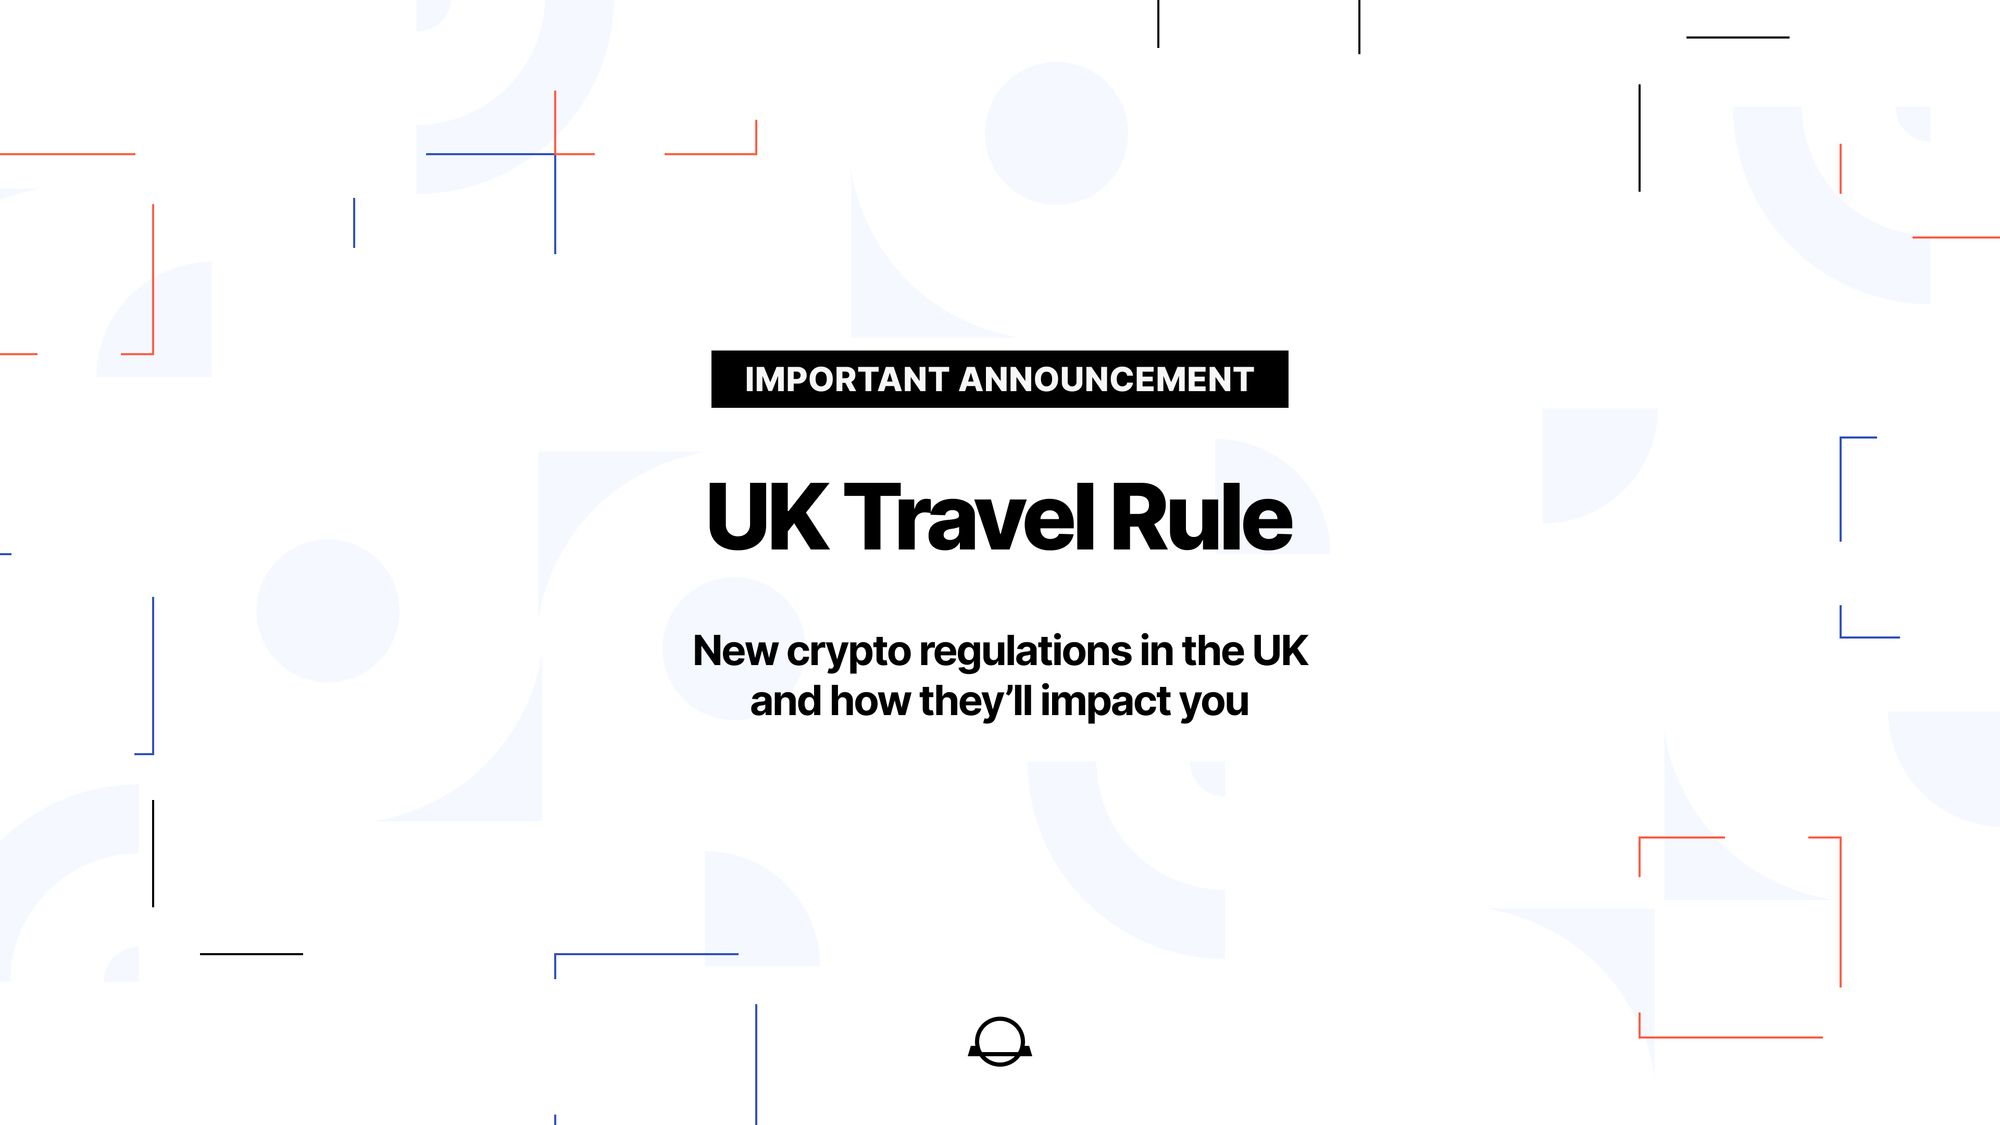 New crypto regulations in the UK and how will they impact you